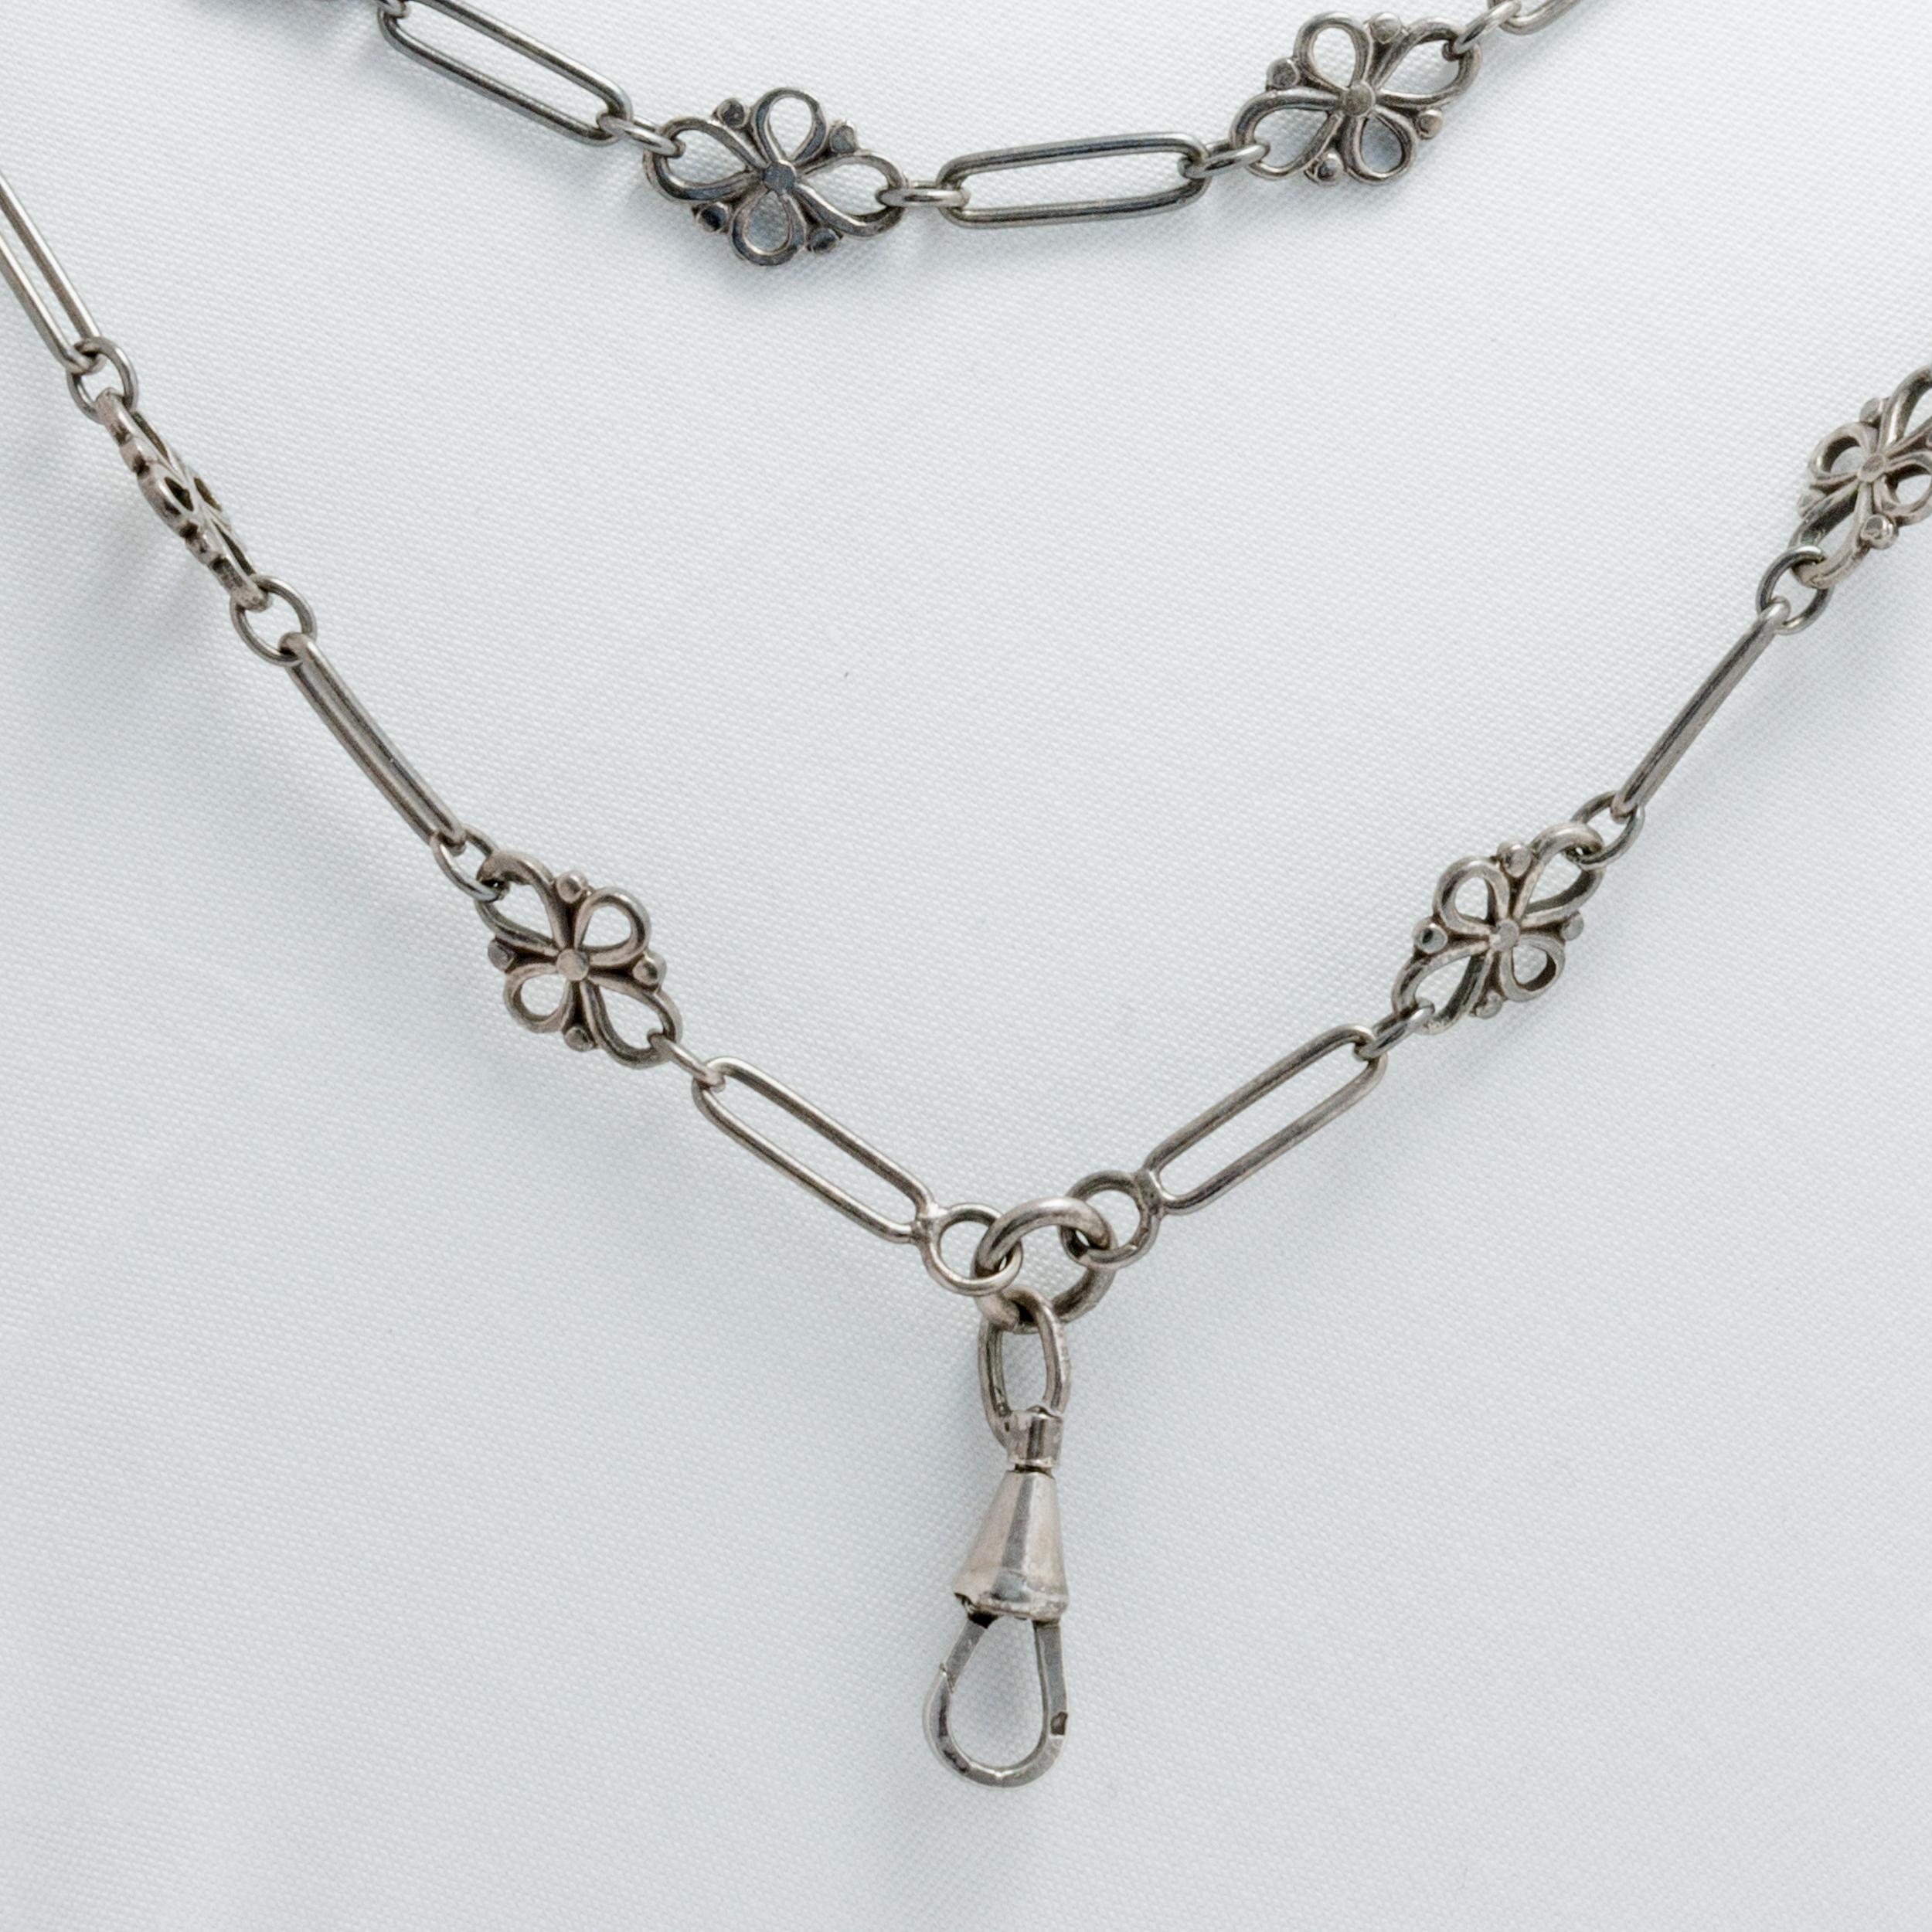 French Antique Silver Long Guard Muff Chain In Good Condition For Sale In New York, NY